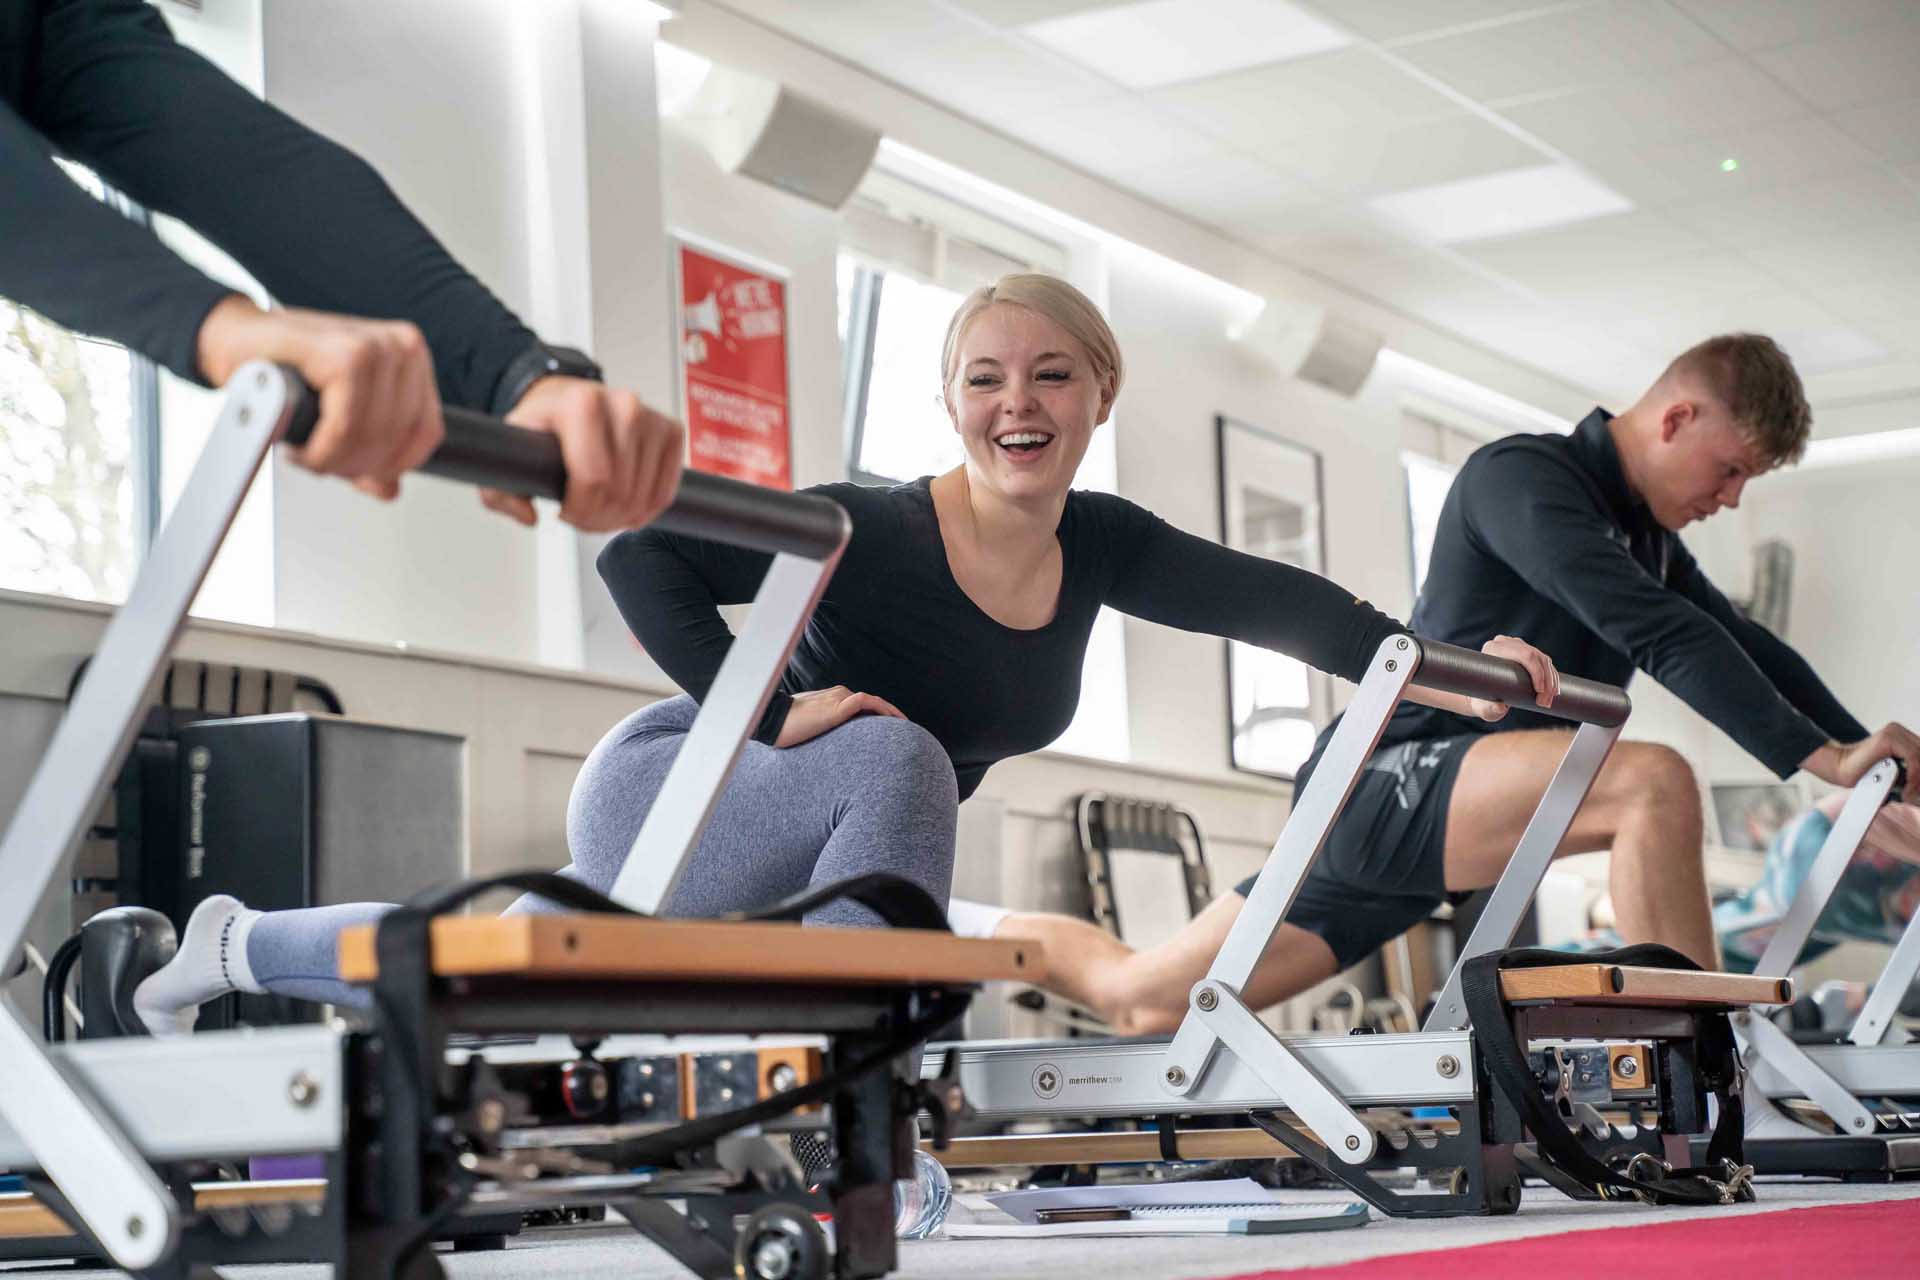 A 50-year-old trainer teaches a young girl to practice Pilates on an